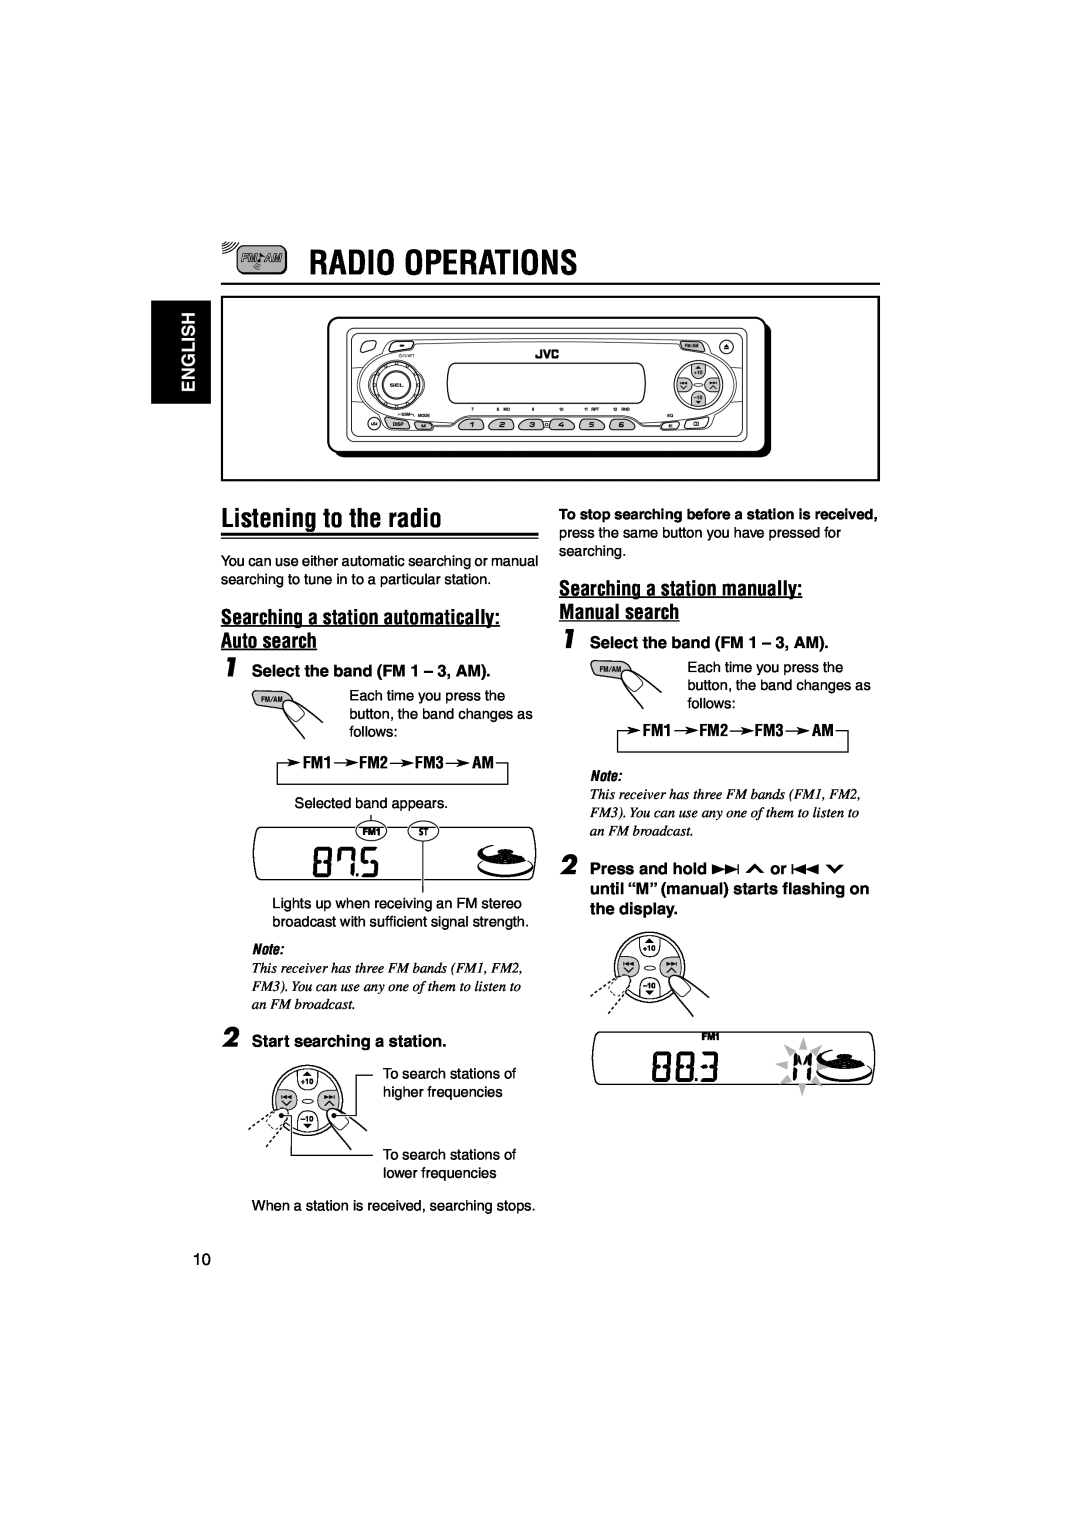 JVC KD-S790, KD-SC800 Radio Operations, Listening to the radio, Searching a station automatically Auto search, English 